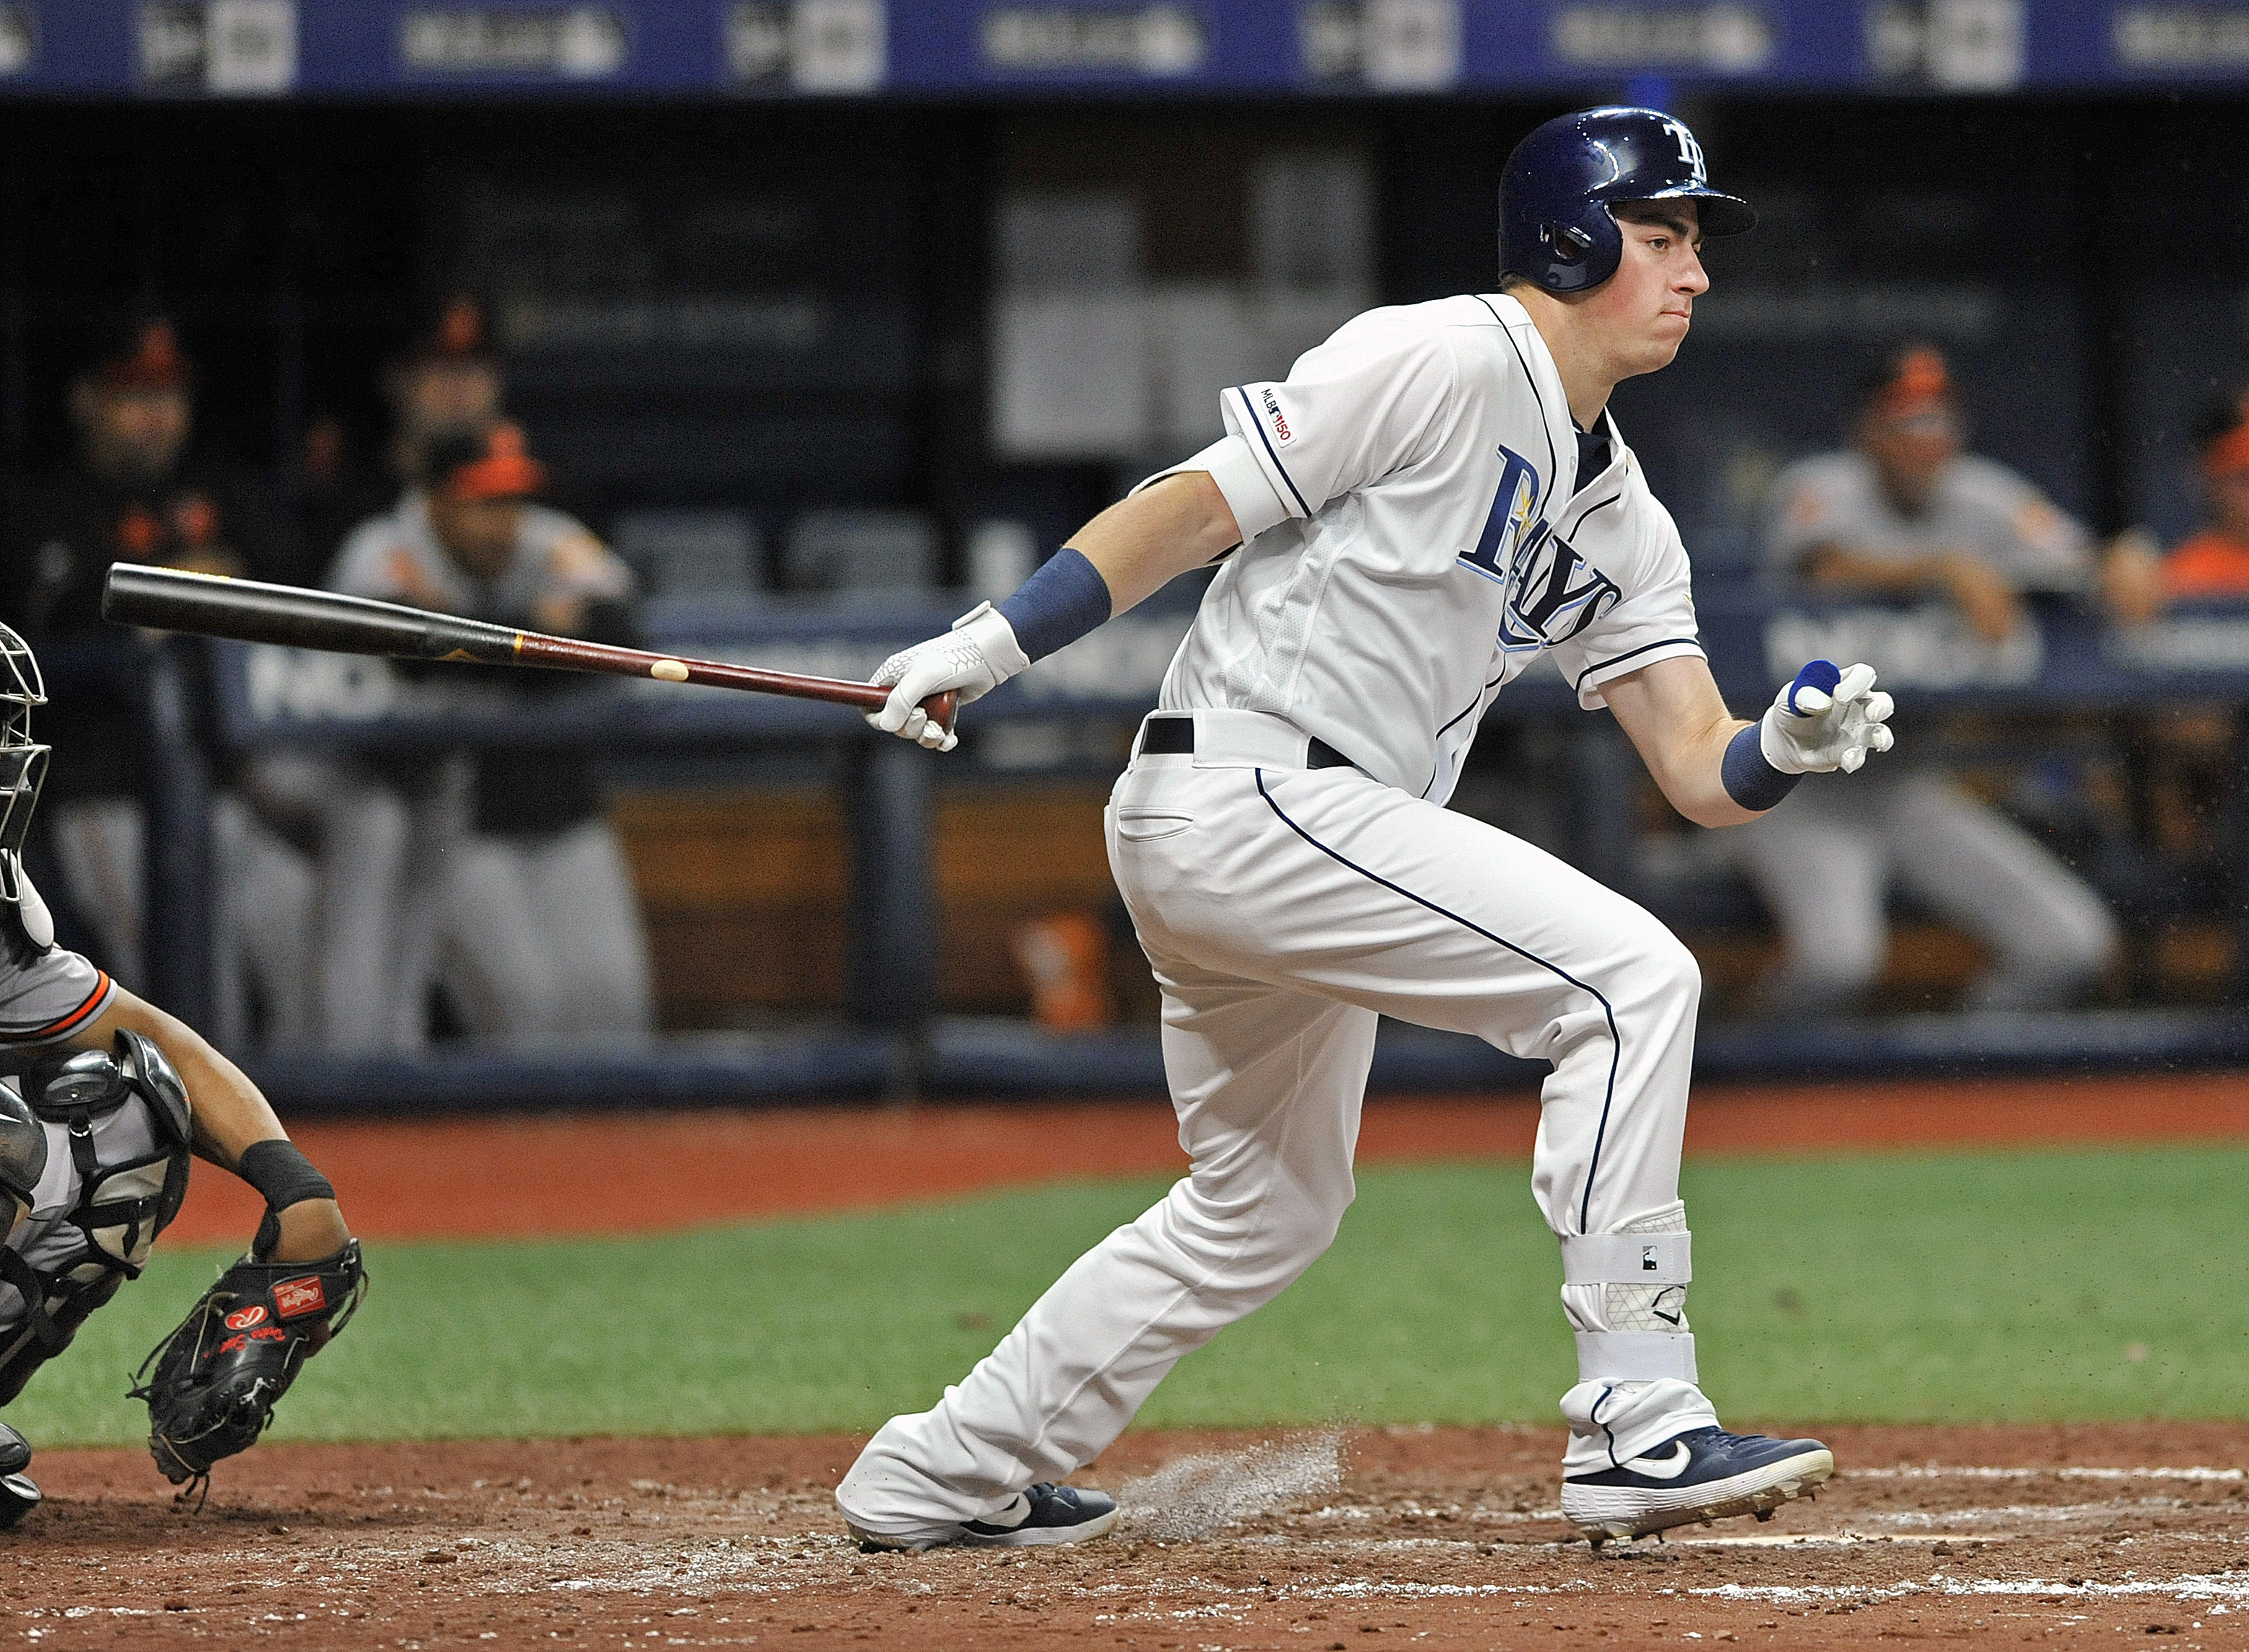 2-way McKay goes 0 for 4 in MLB hitting debut with Rays